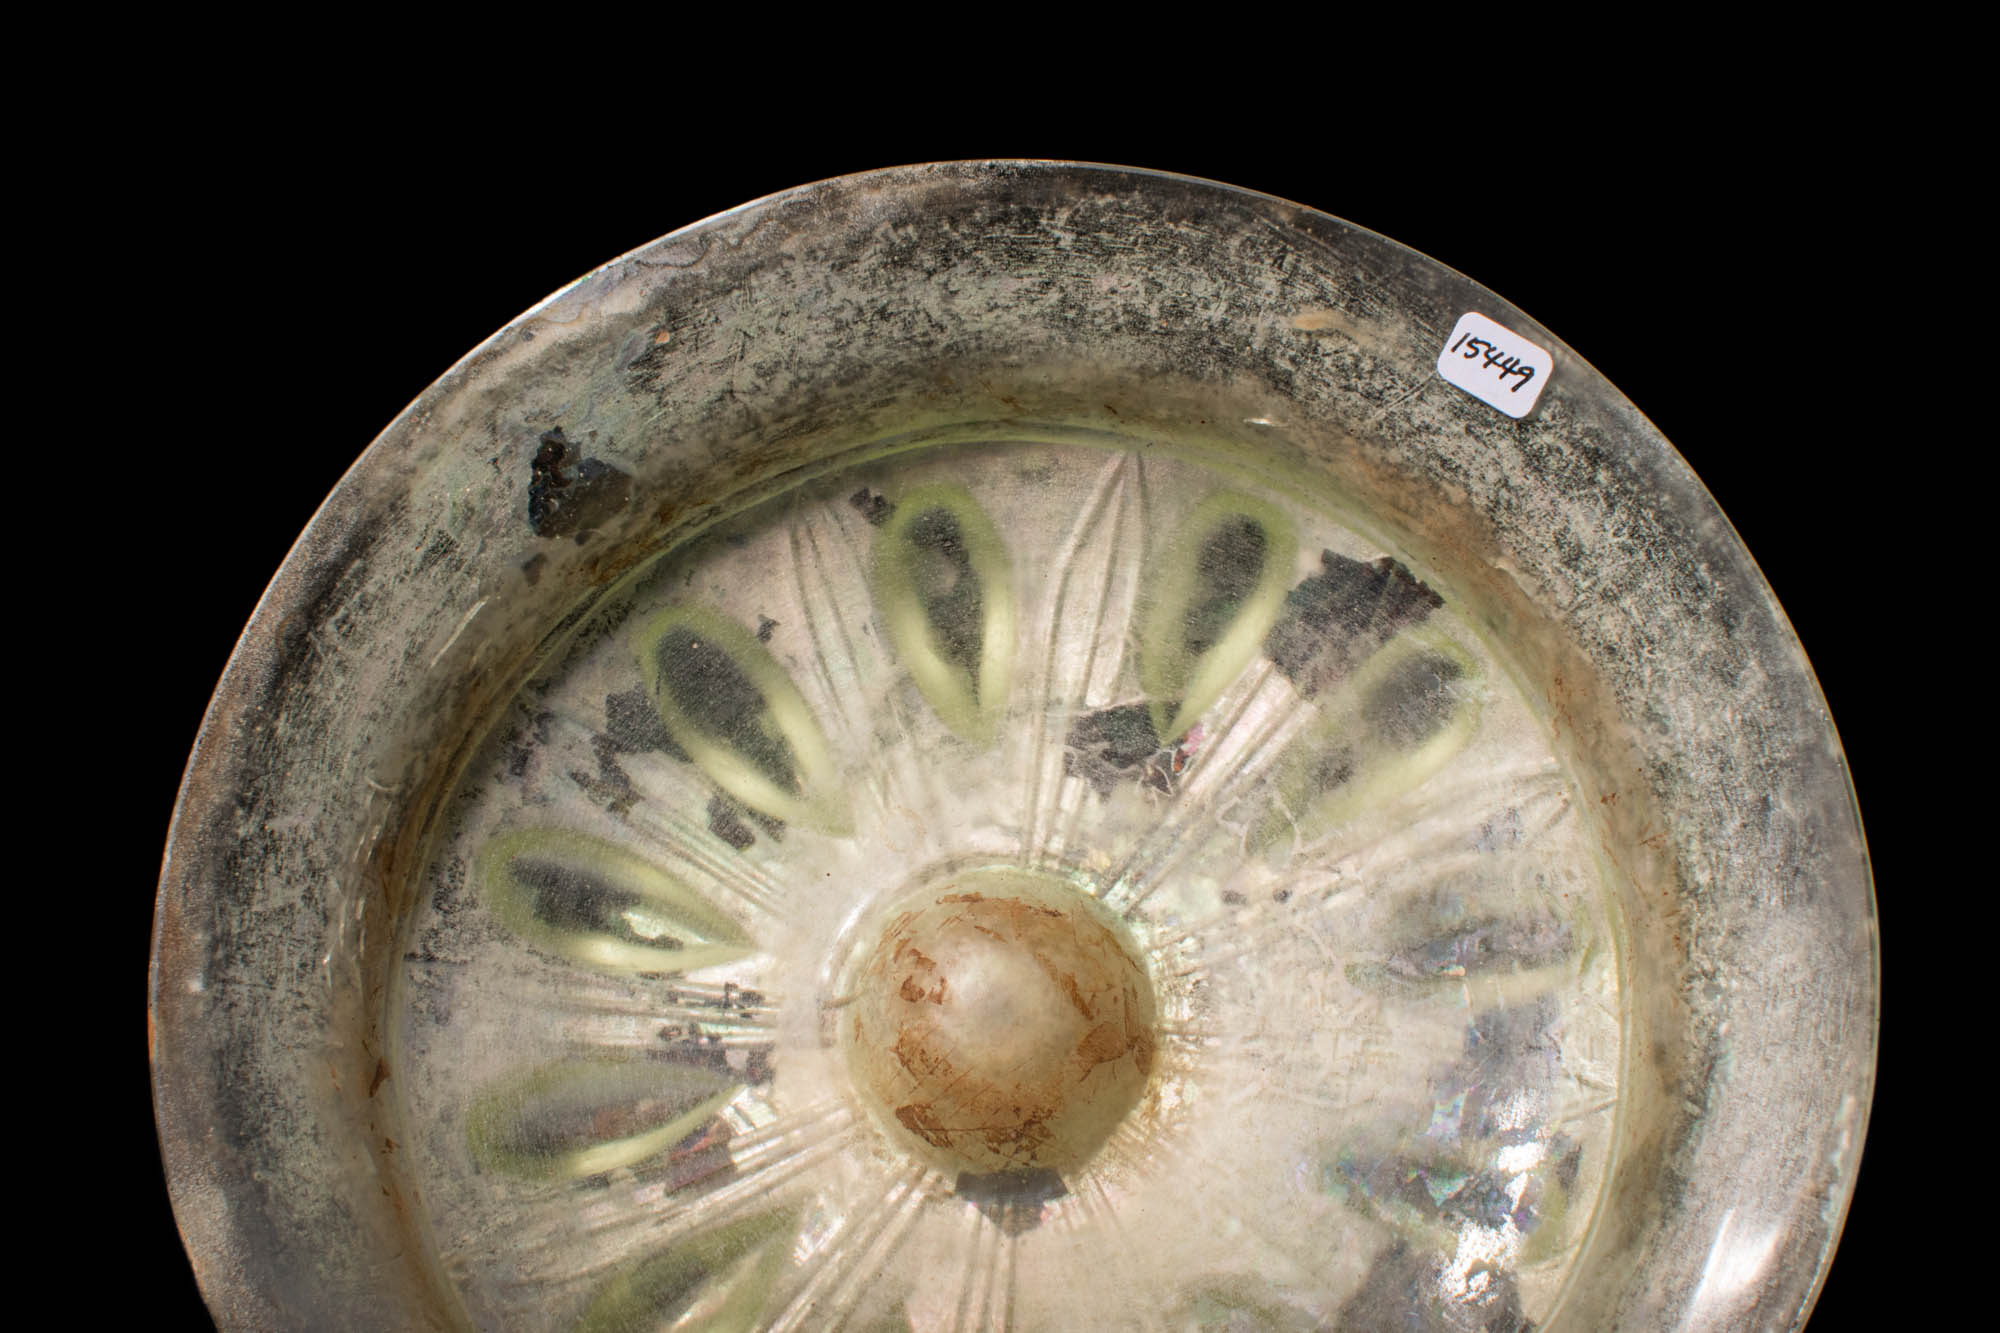 GREEK GLASS PHIALE DECORATED WITH ROSETTE - Image 4 of 4